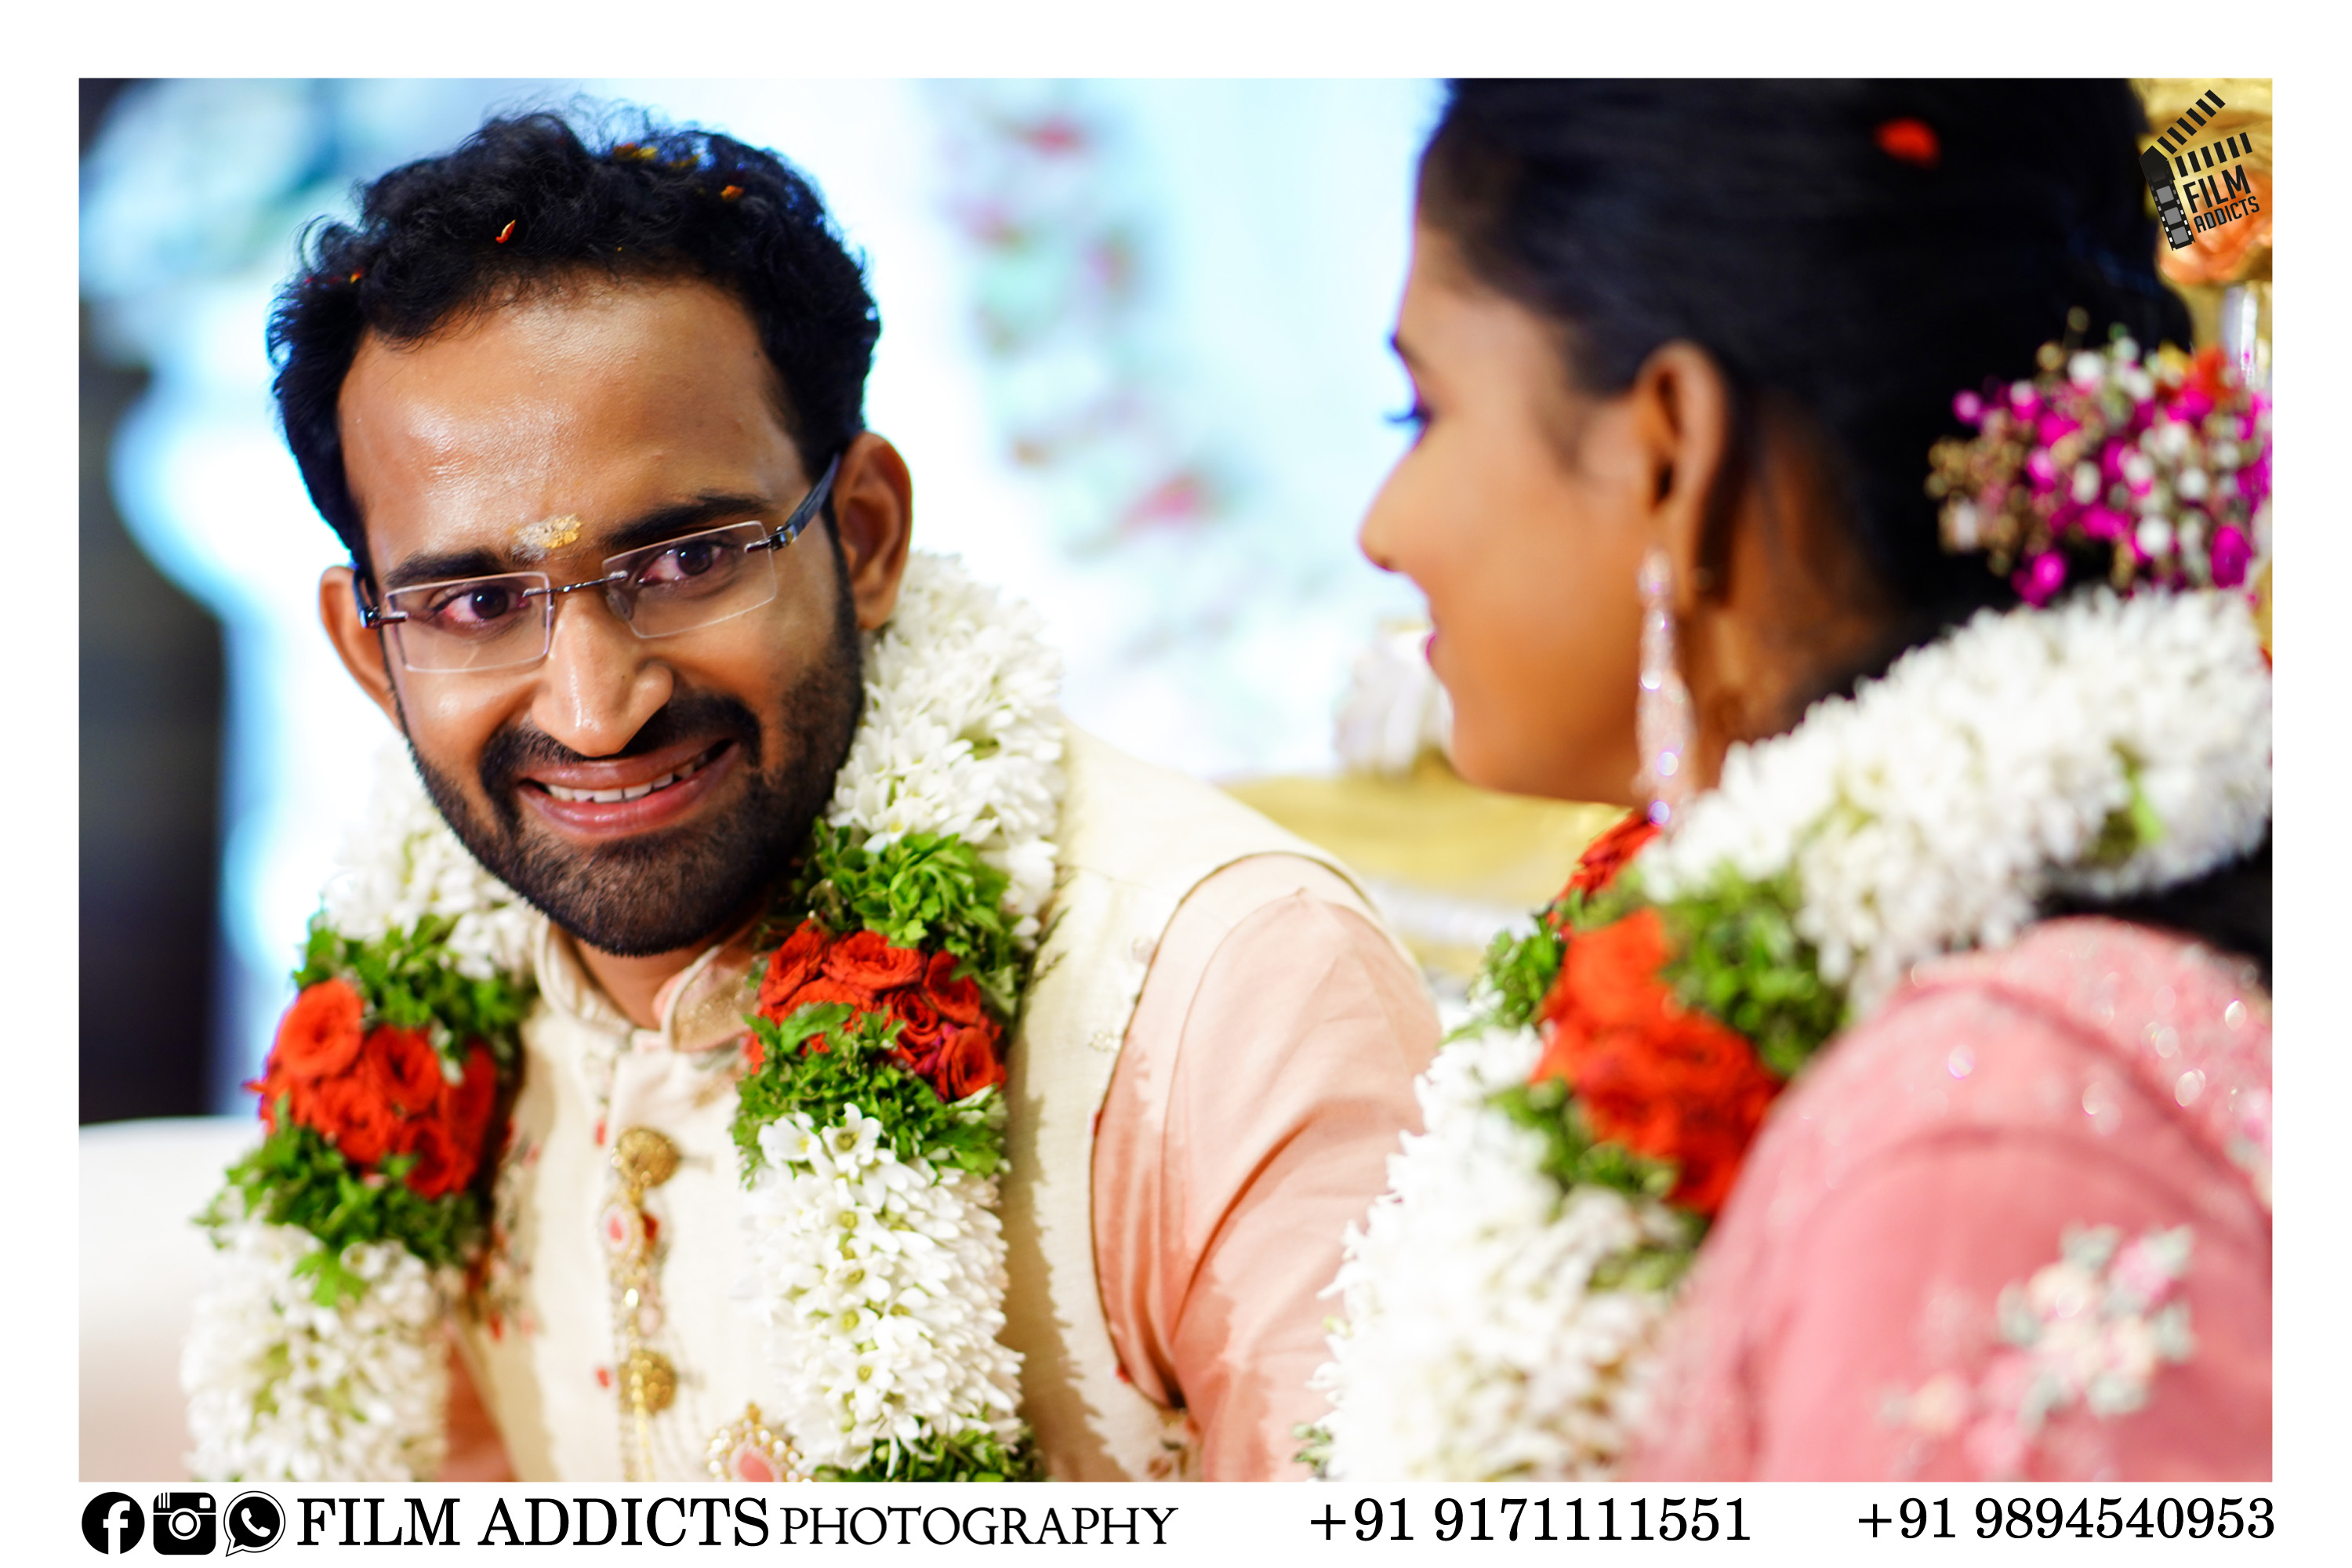 Best Candid Photographers in Theni-FilmAddicts Photography, Best Wedding Candid photographers in Theni,  Wedding Candid Moments FilmAddicts, Photography FilmAddictsPhotography, best wedding in Theni, Best Candid-shoot in Theni, best moment, Best wedding moments, Best wedding photography in Theni, Best wedding videography in Theni, Best couple shoot, Best candid, Best wedding shoot,  best marriage photographers in Theni, best marriage photography in Theni, best candid photography, best Theni photography, Theni photography, Theni couples, candid shoot, candid , tamilnadu wedding photography, best photographers in Theni, tamilnadu.